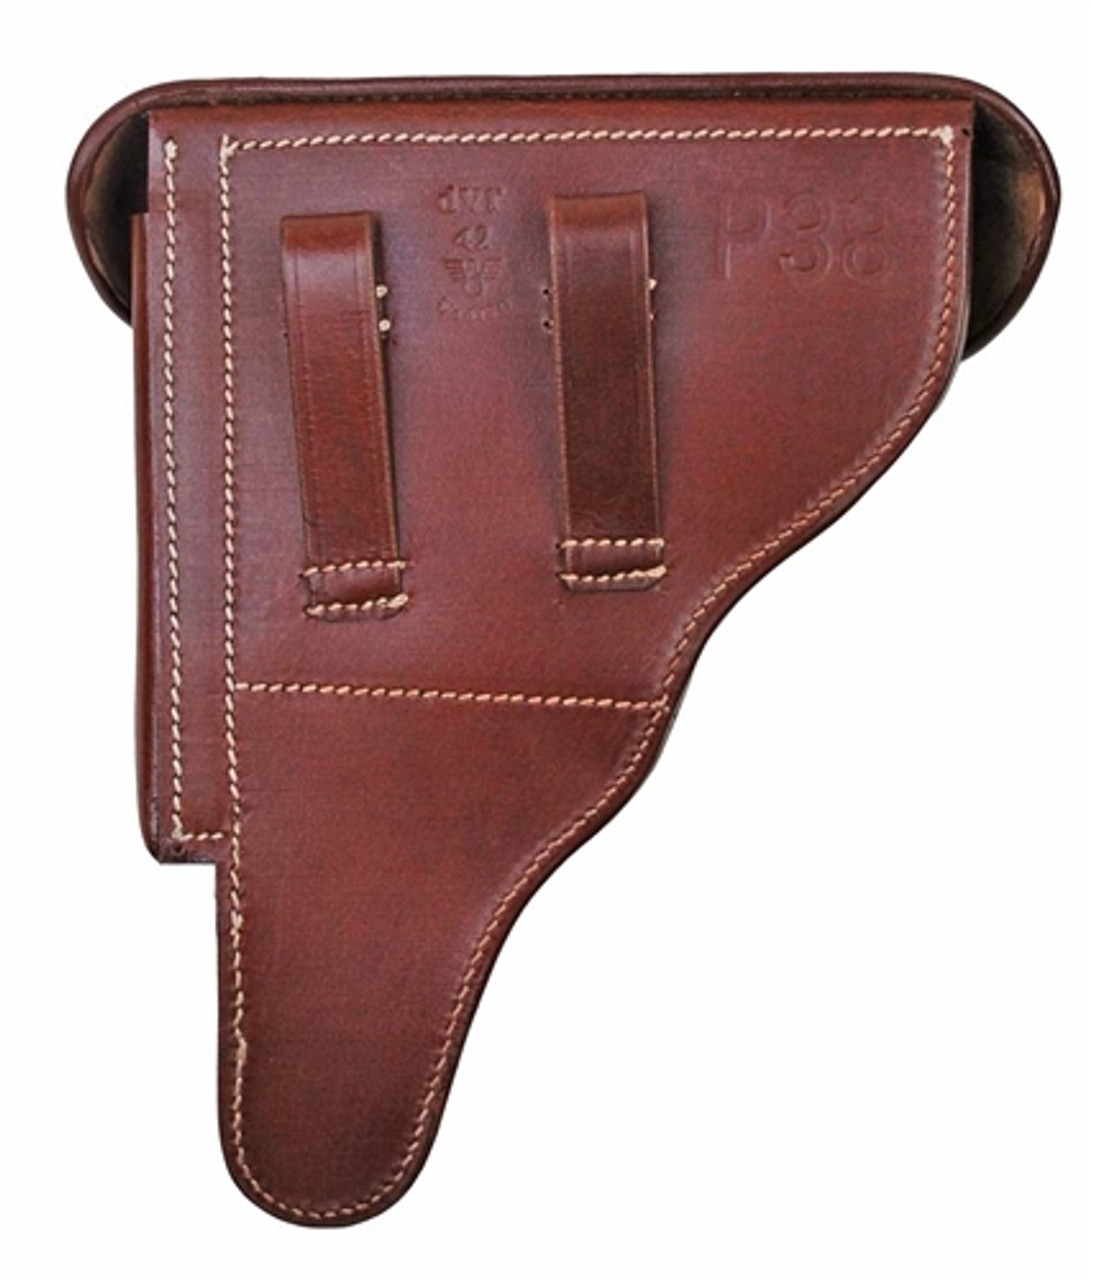 Brown leather P-38 Hardshell Holster from Hessen Antique